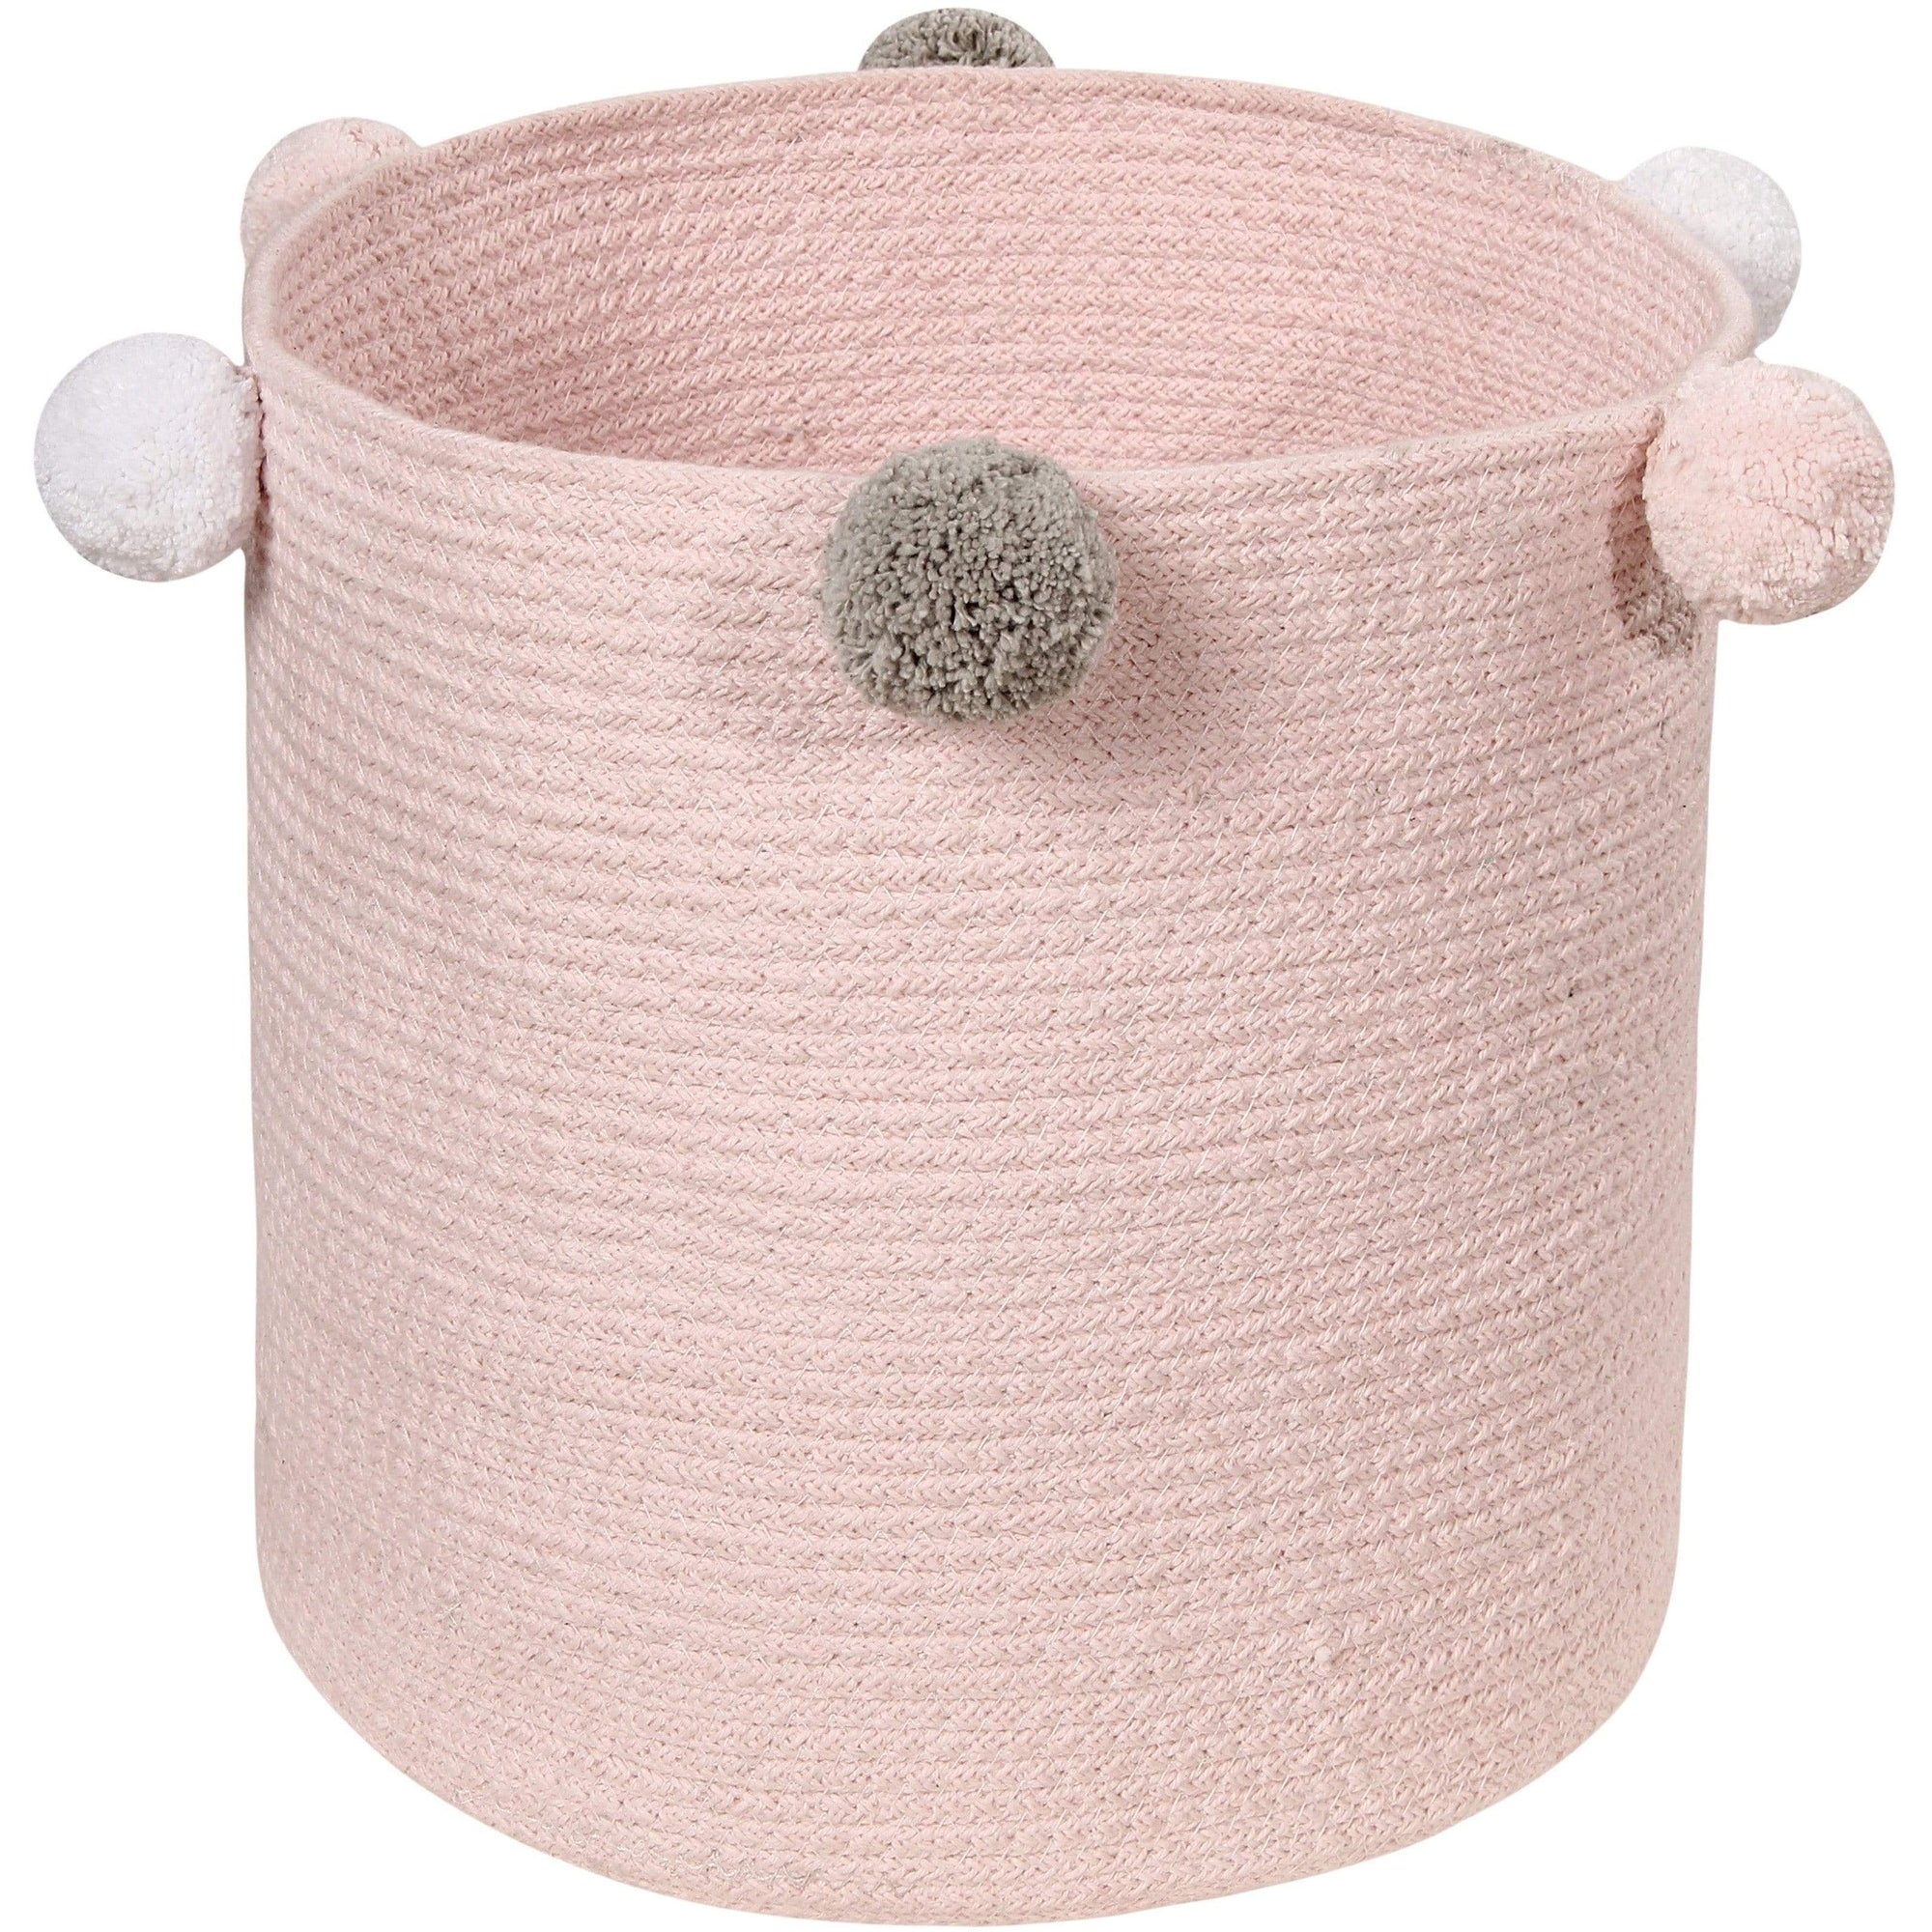 Rugs by Roo | Lorena Canals Bubbly Pink Baby Basket-BSK-BUBBLY-PINK